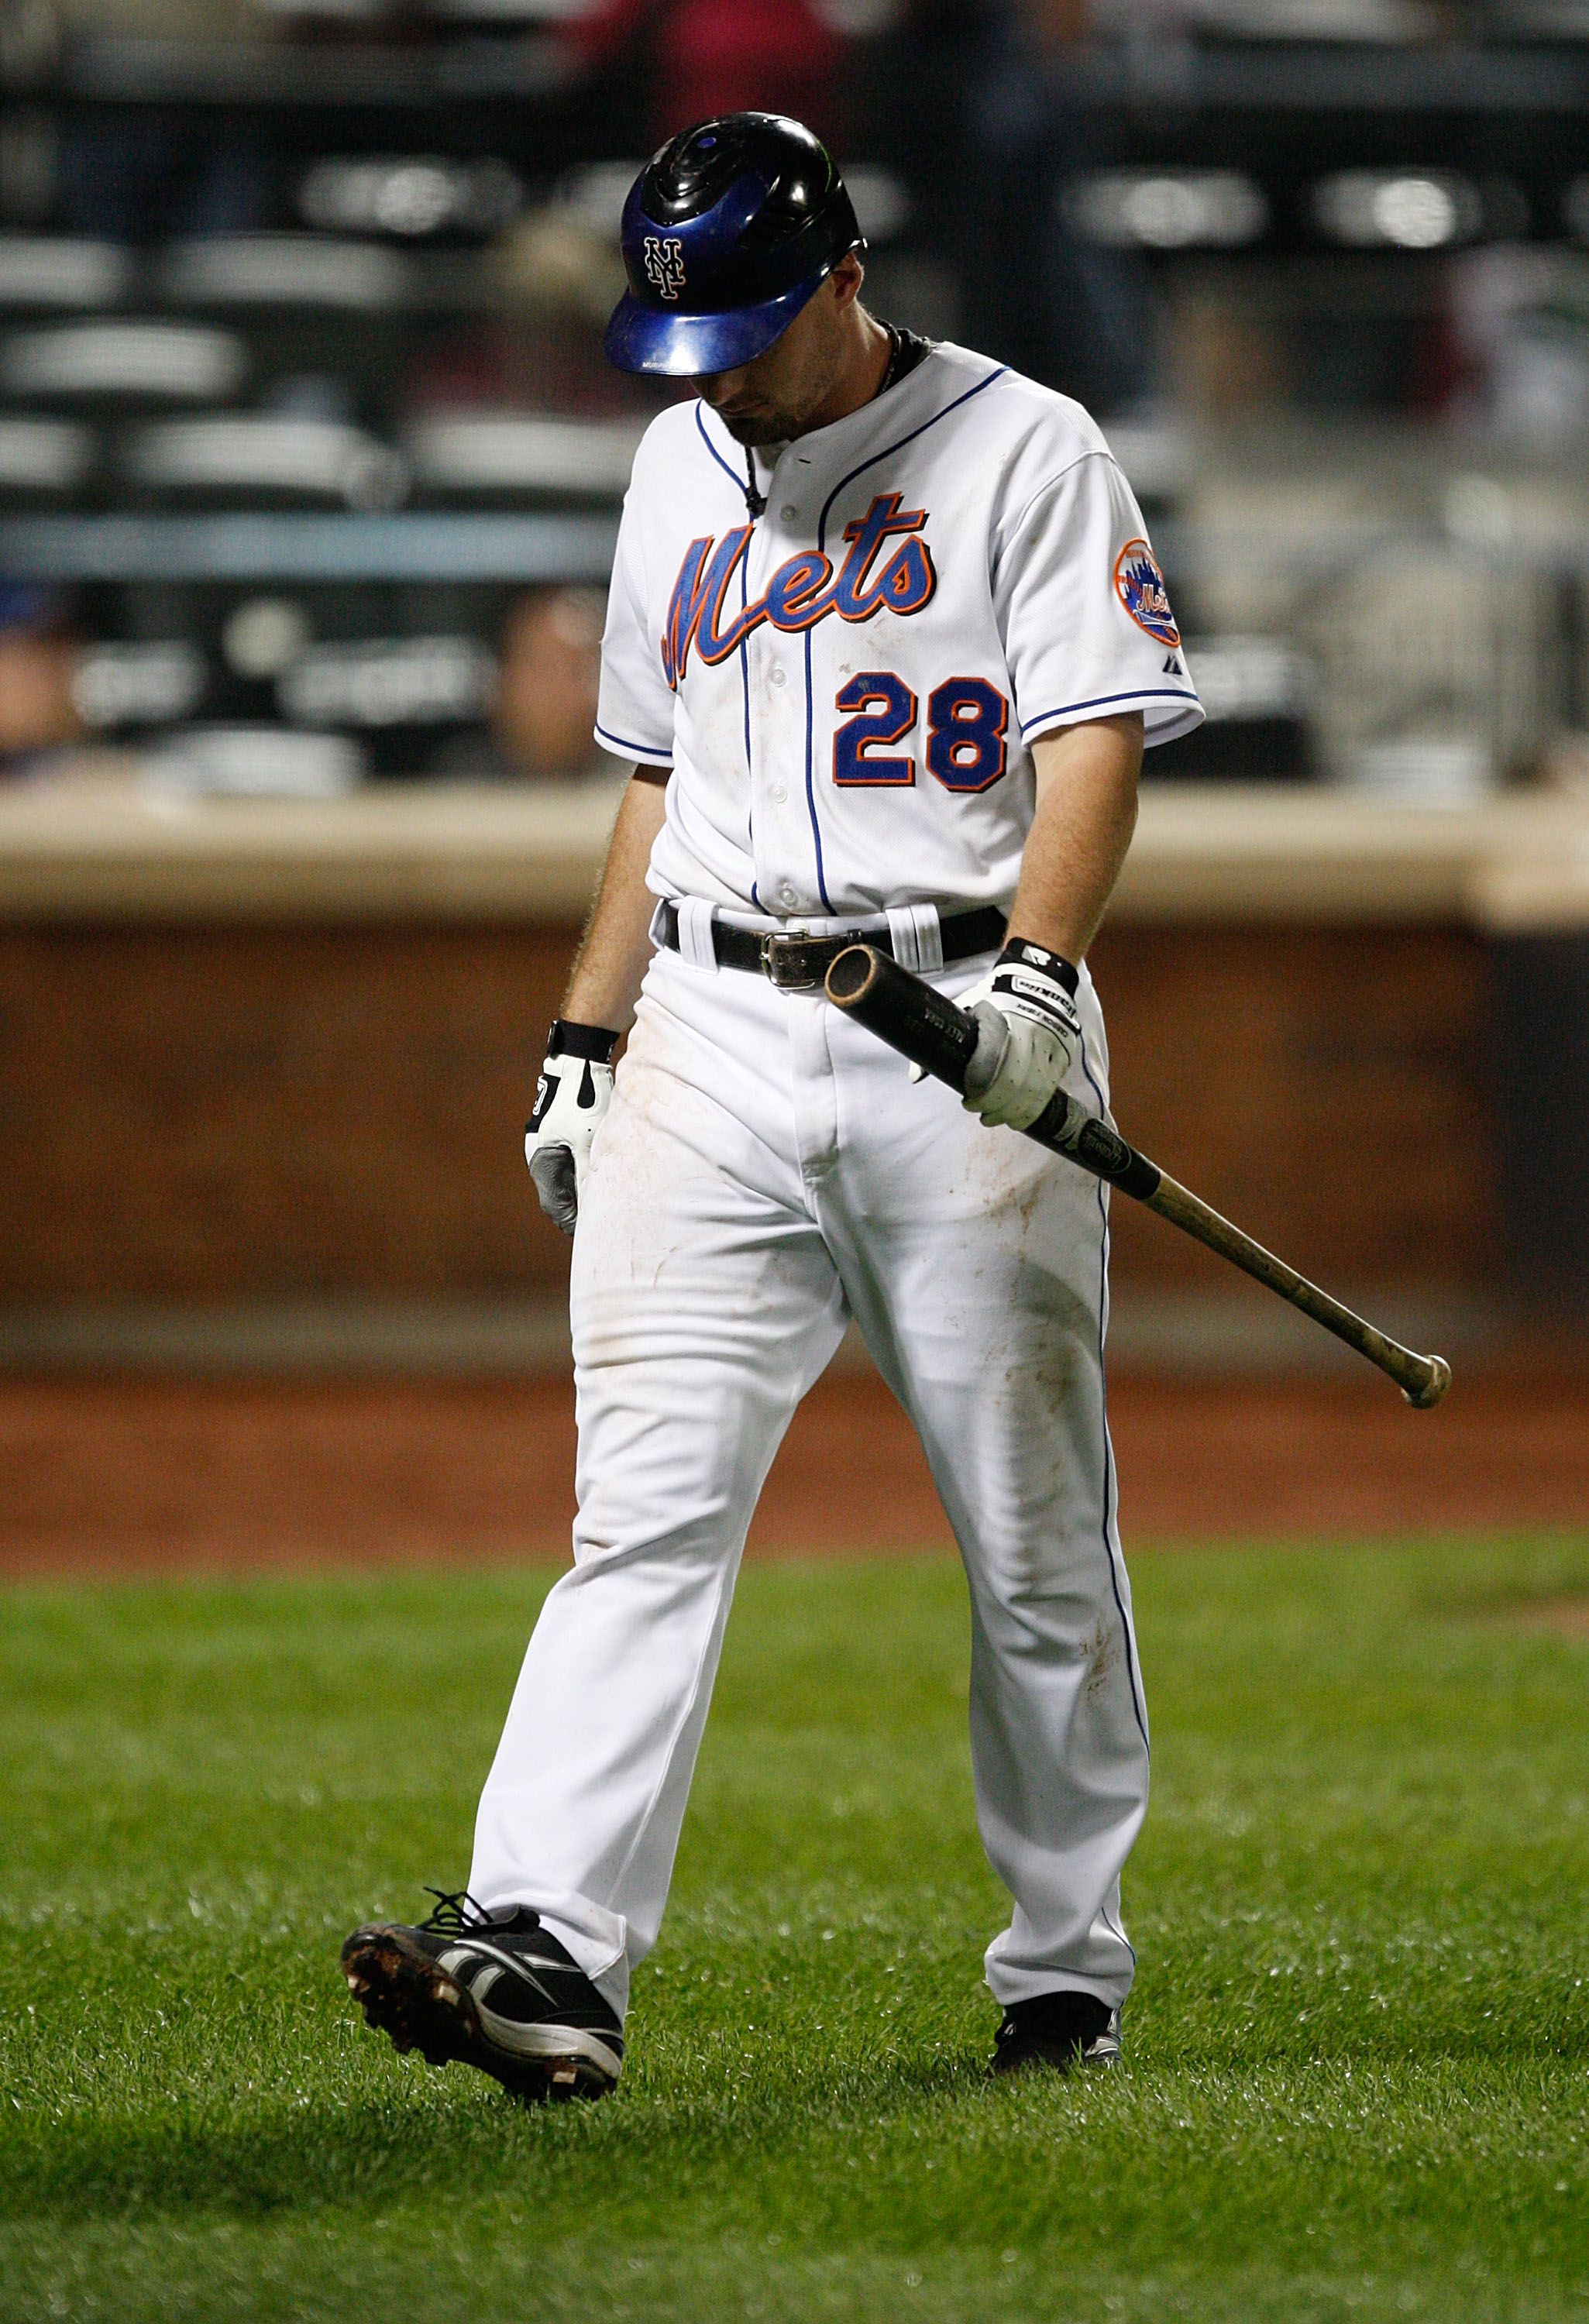 NEW YORK - SEPTEMBER 23:  Daniel Murphy #28 of the New York Mets walks to the dugout after striking out against the Atlanta Braves during the game on September 23, 2009 at Citi Field in the Flushing neighborhood of the Queens borough of New York City.  (P